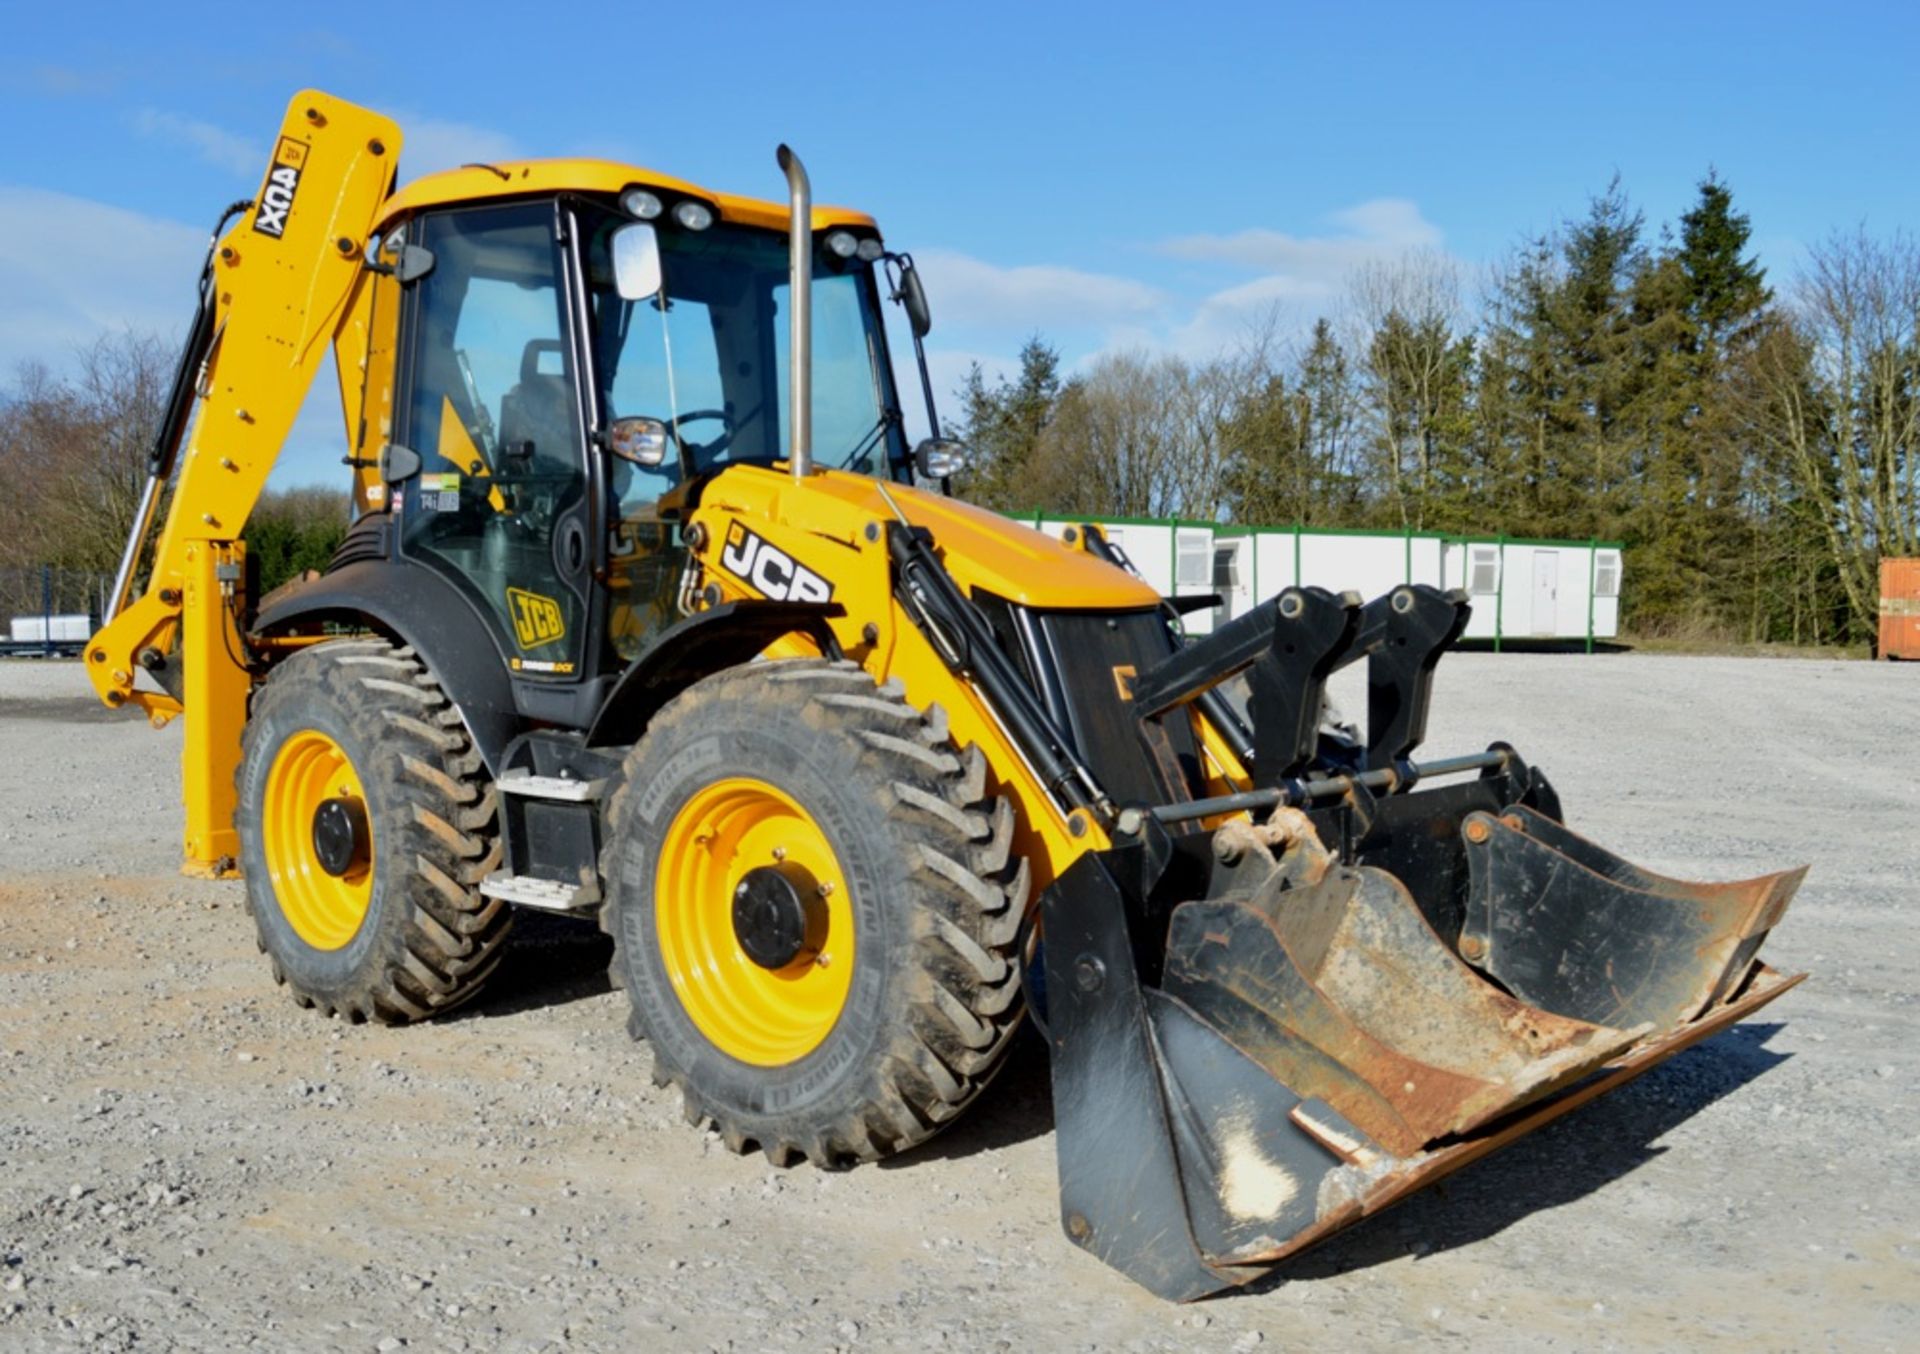 JCB 4CX Contractor backhoe loader Year: 2014 S/N: 2269627 Recorded Hours: 78 - Image 3 of 17